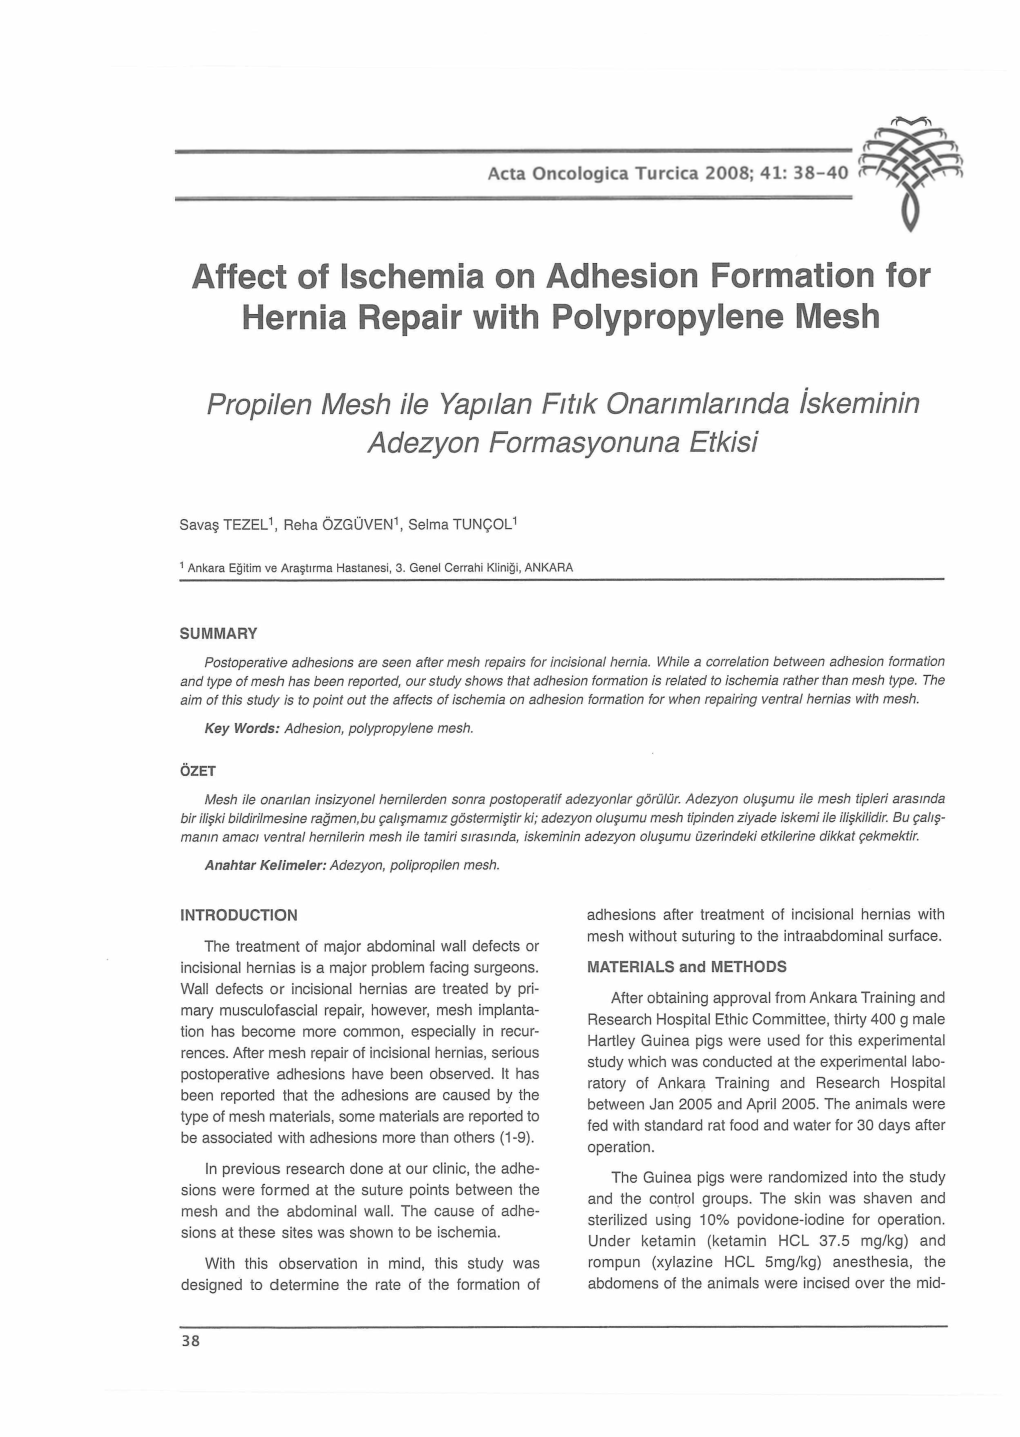 Affect of Ischemia on Adhesion Formation for Hernia Repair with Polypropylene Mesh